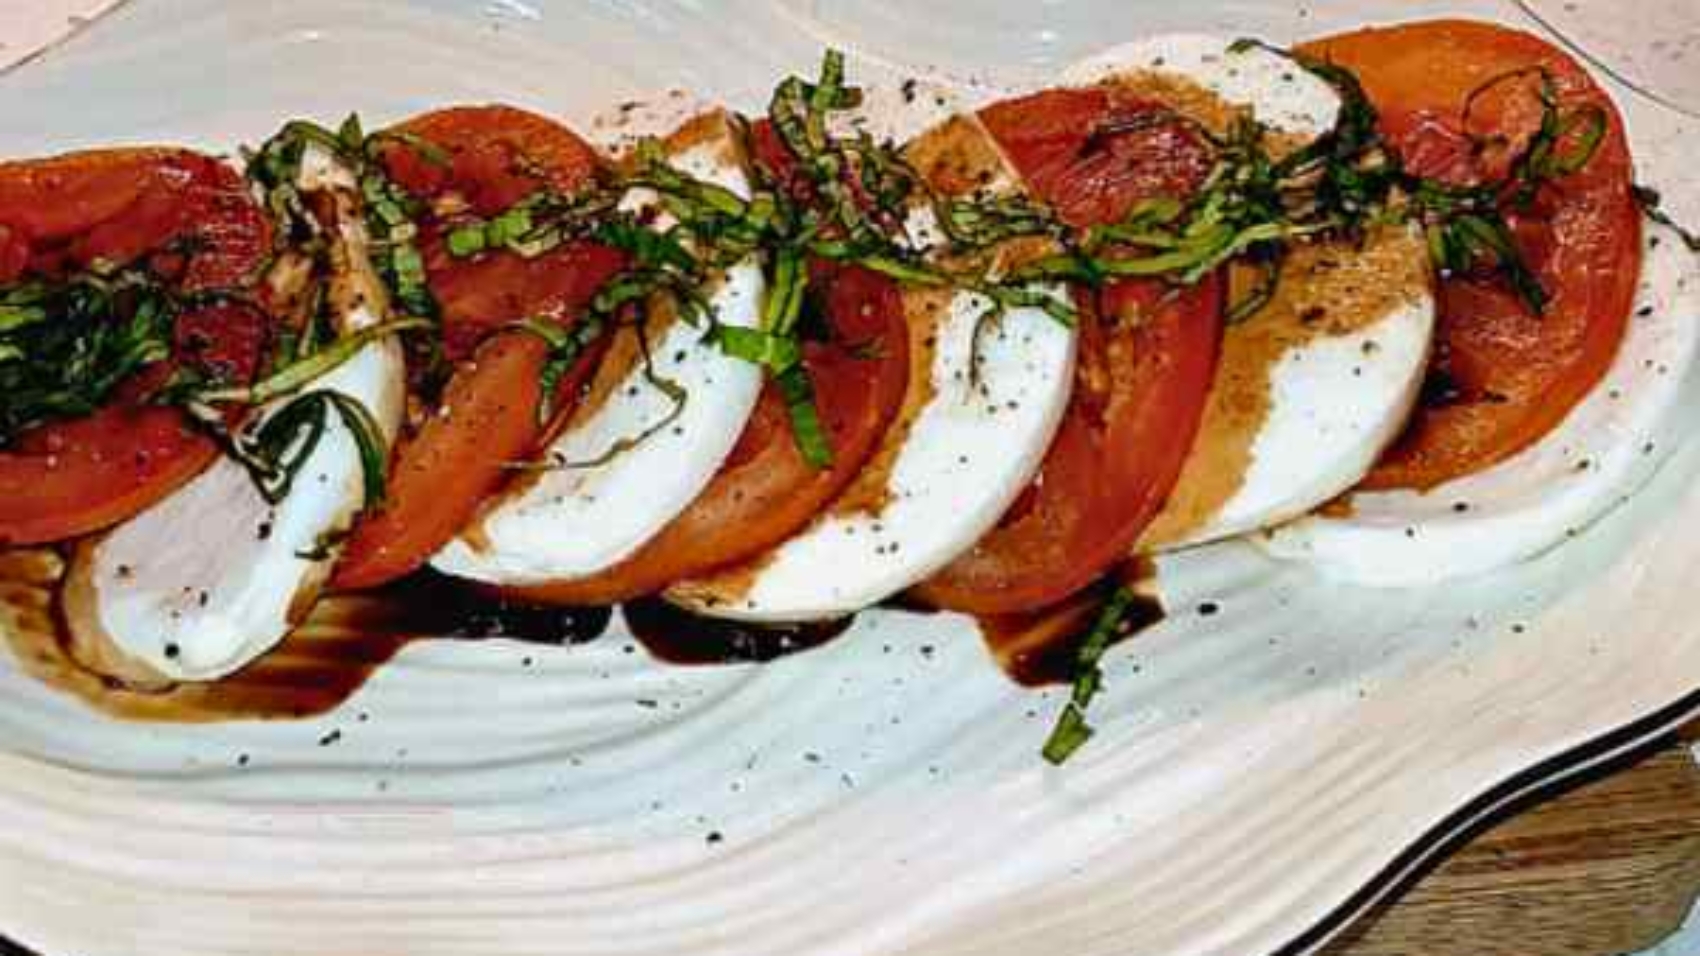 Sliced red tomatoes with alternating slices of mozzarella cheese